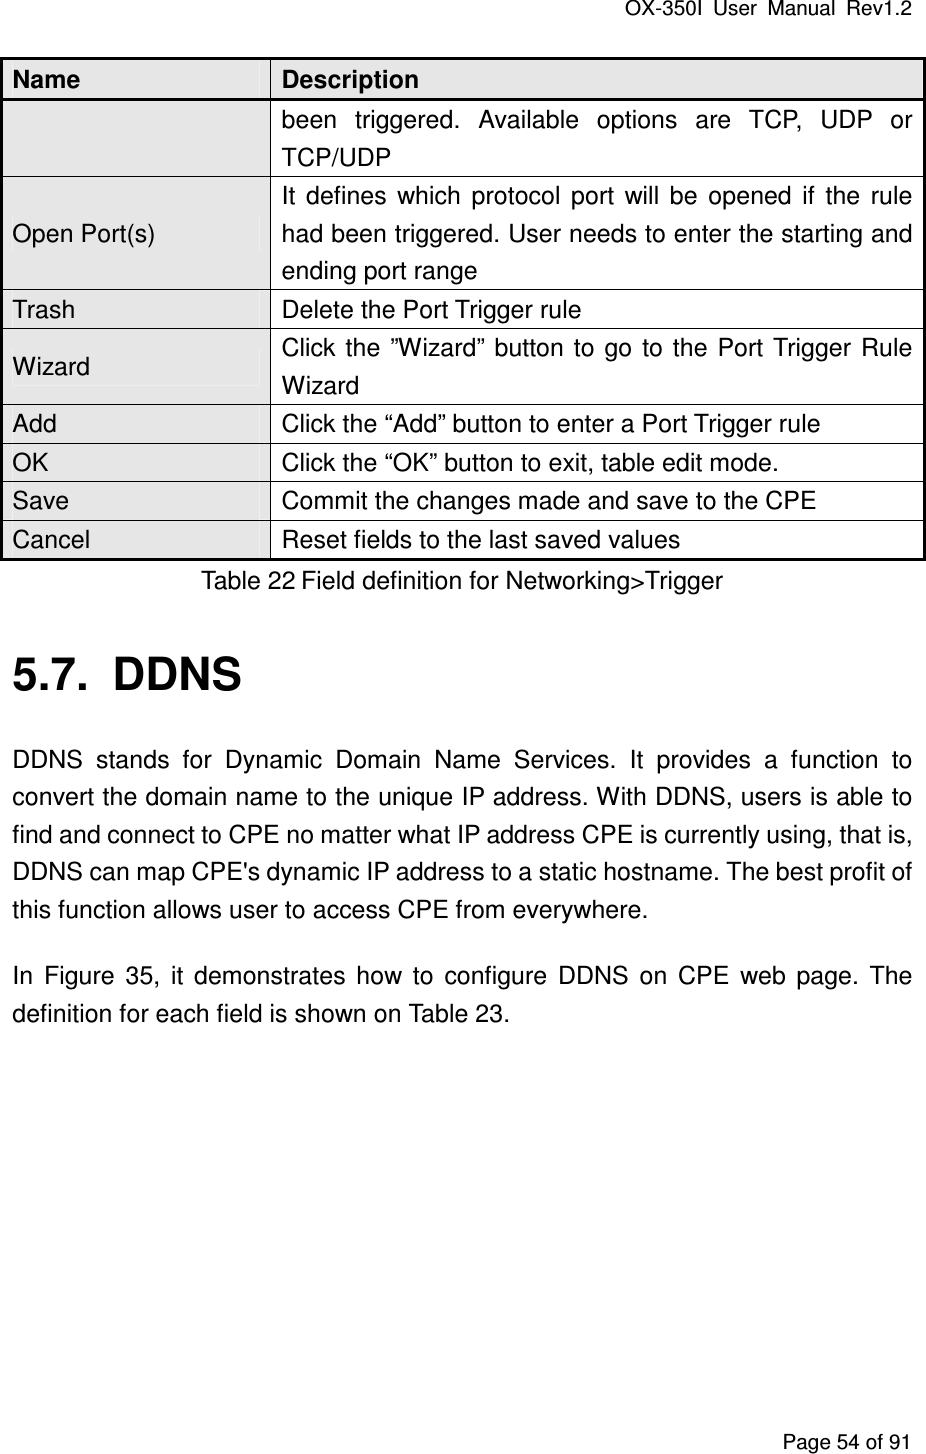 OX-350I  User  Manual  Rev1.2 Page 54 of 91 Name  Description been  triggered.  Available  options  are  TCP,  UDP  or TCP/UDP Open Port(s) It  defines  which  protocol  port  will  be  opened  if  the  rule had been triggered. User needs to enter the starting and ending port range Trash  Delete the Port Trigger rule Wizard  Click  the  ”Wizard” button to go to the  Port Trigger  Rule Wizard Add  Click the “Add” button to enter a Port Trigger rule OK  Click the “OK” button to exit, table edit mode. Save  Commit the changes made and save to the CPE Cancel  Reset fields to the last saved values Table 22 Field definition for Networking&gt;Trigger 5.7.  DDNS DDNS  stands  for  Dynamic  Domain  Name  Services.  It  provides  a  function  to convert the domain name to the unique IP address. With DDNS, users is able to find and connect to CPE no matter what IP address CPE is currently using, that is, DDNS can map CPE&apos;s dynamic IP address to a static hostname. The best profit of this function allows user to access CPE from everywhere. In  Figure  35,  it  demonstrates  how  to  configure  DDNS  on  CPE  web  page.  The definition for each field is shown on Table 23. 